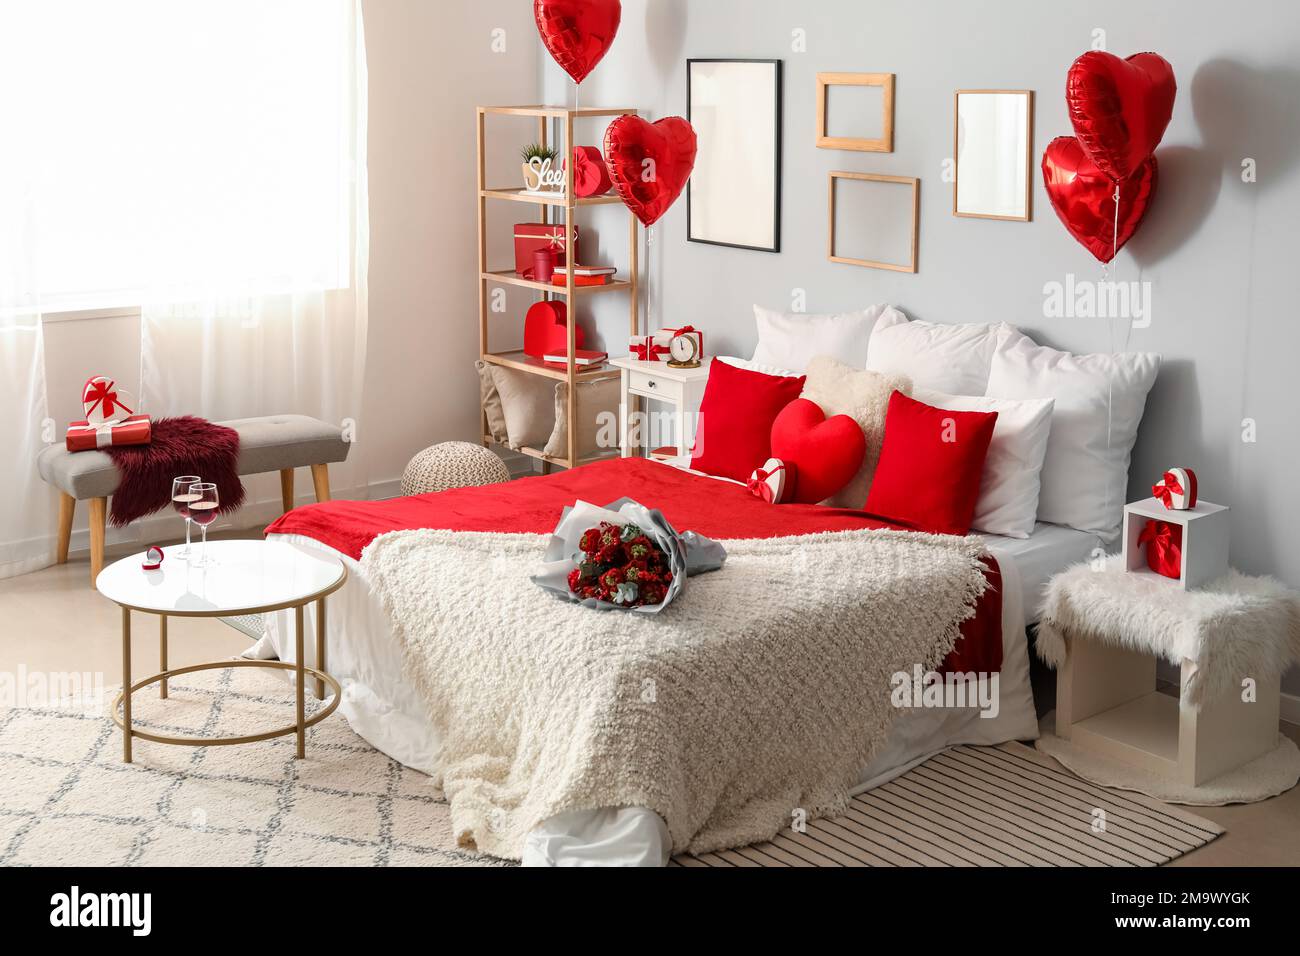 Interior of bedroom decorated for Valentine\'s Day with flowers and ...